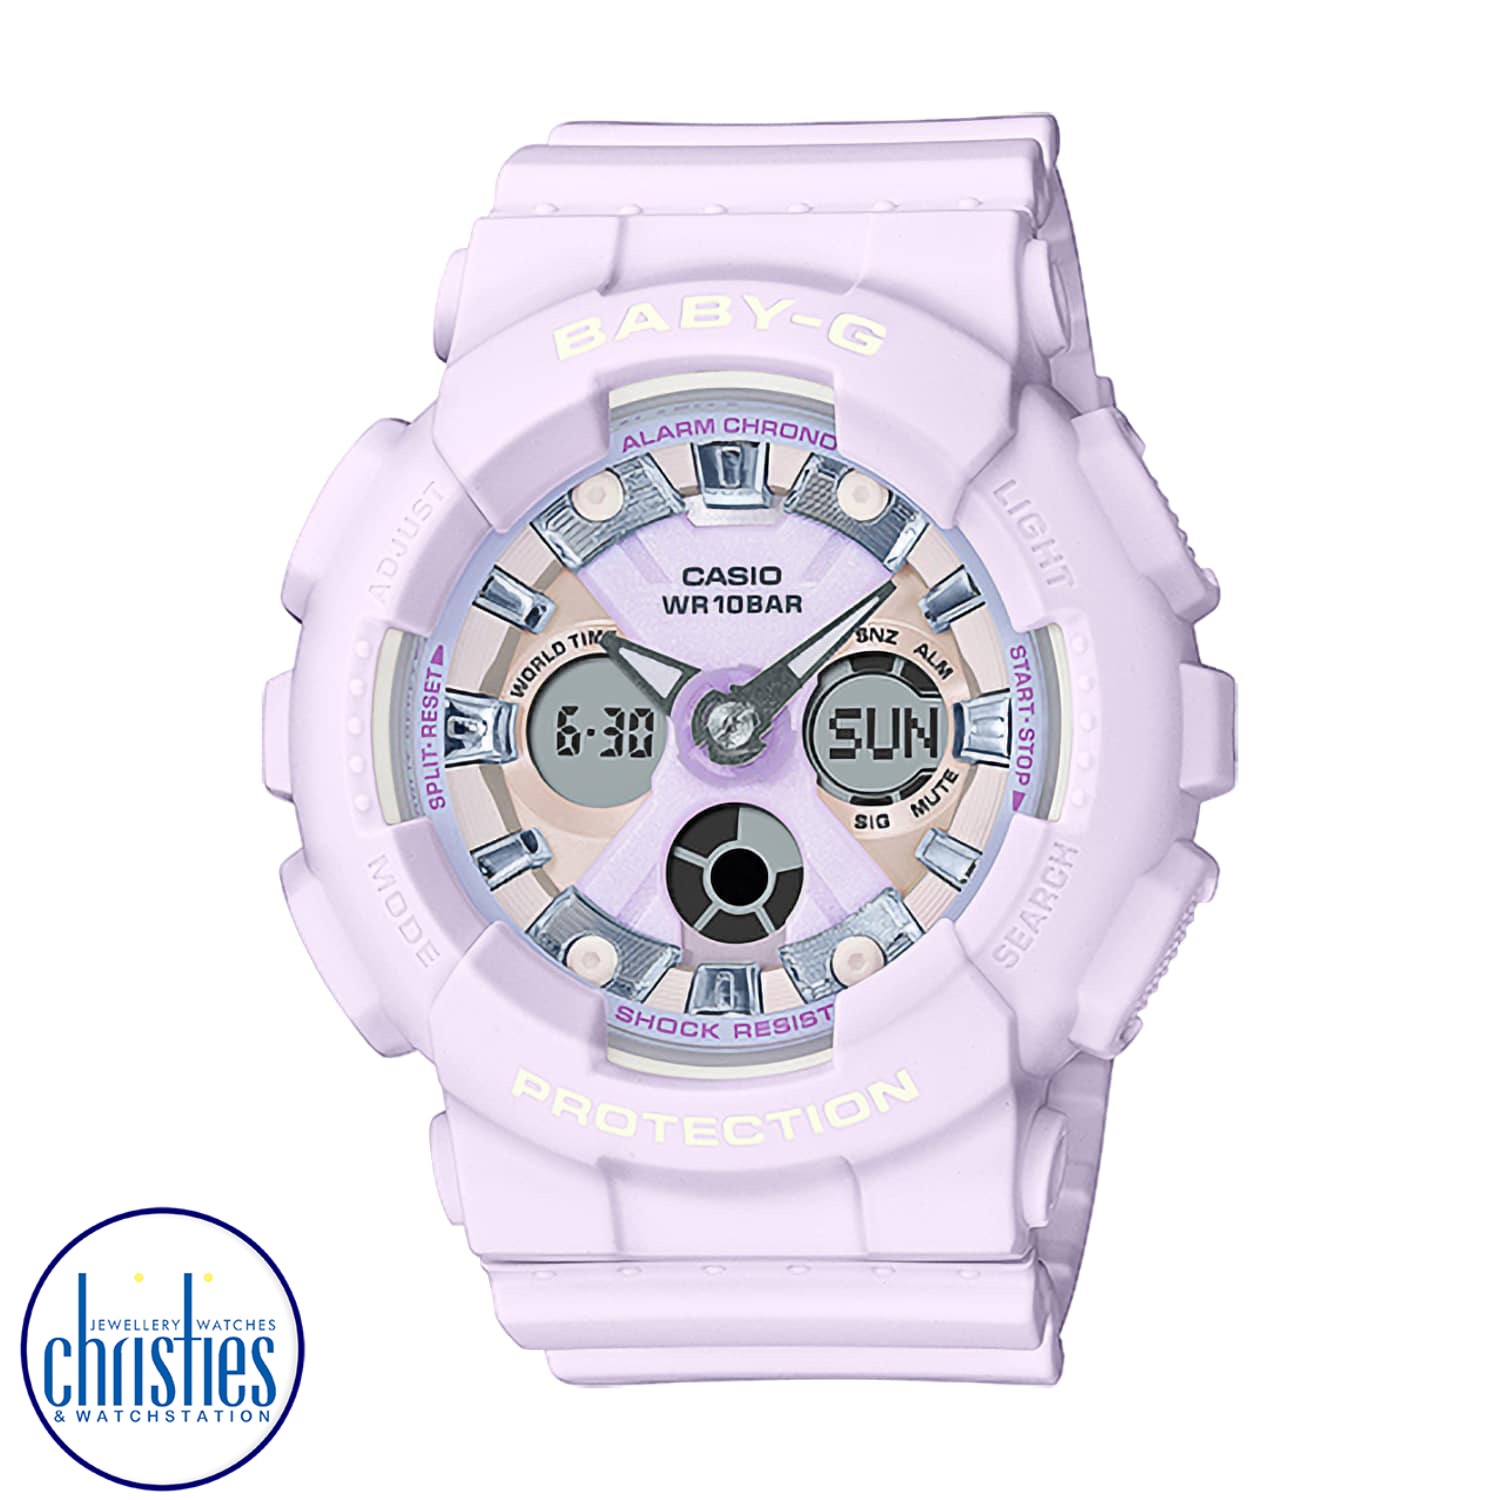 BA130WP-6A Casio BabY-G Watch Icy Pastel Series. Keep your cool with an icy pastel take on the ever-popular mannish BA-130 design with oversized case. Shock-resistant construction and water resistance up to 100 meters deliver the durable practicality you 